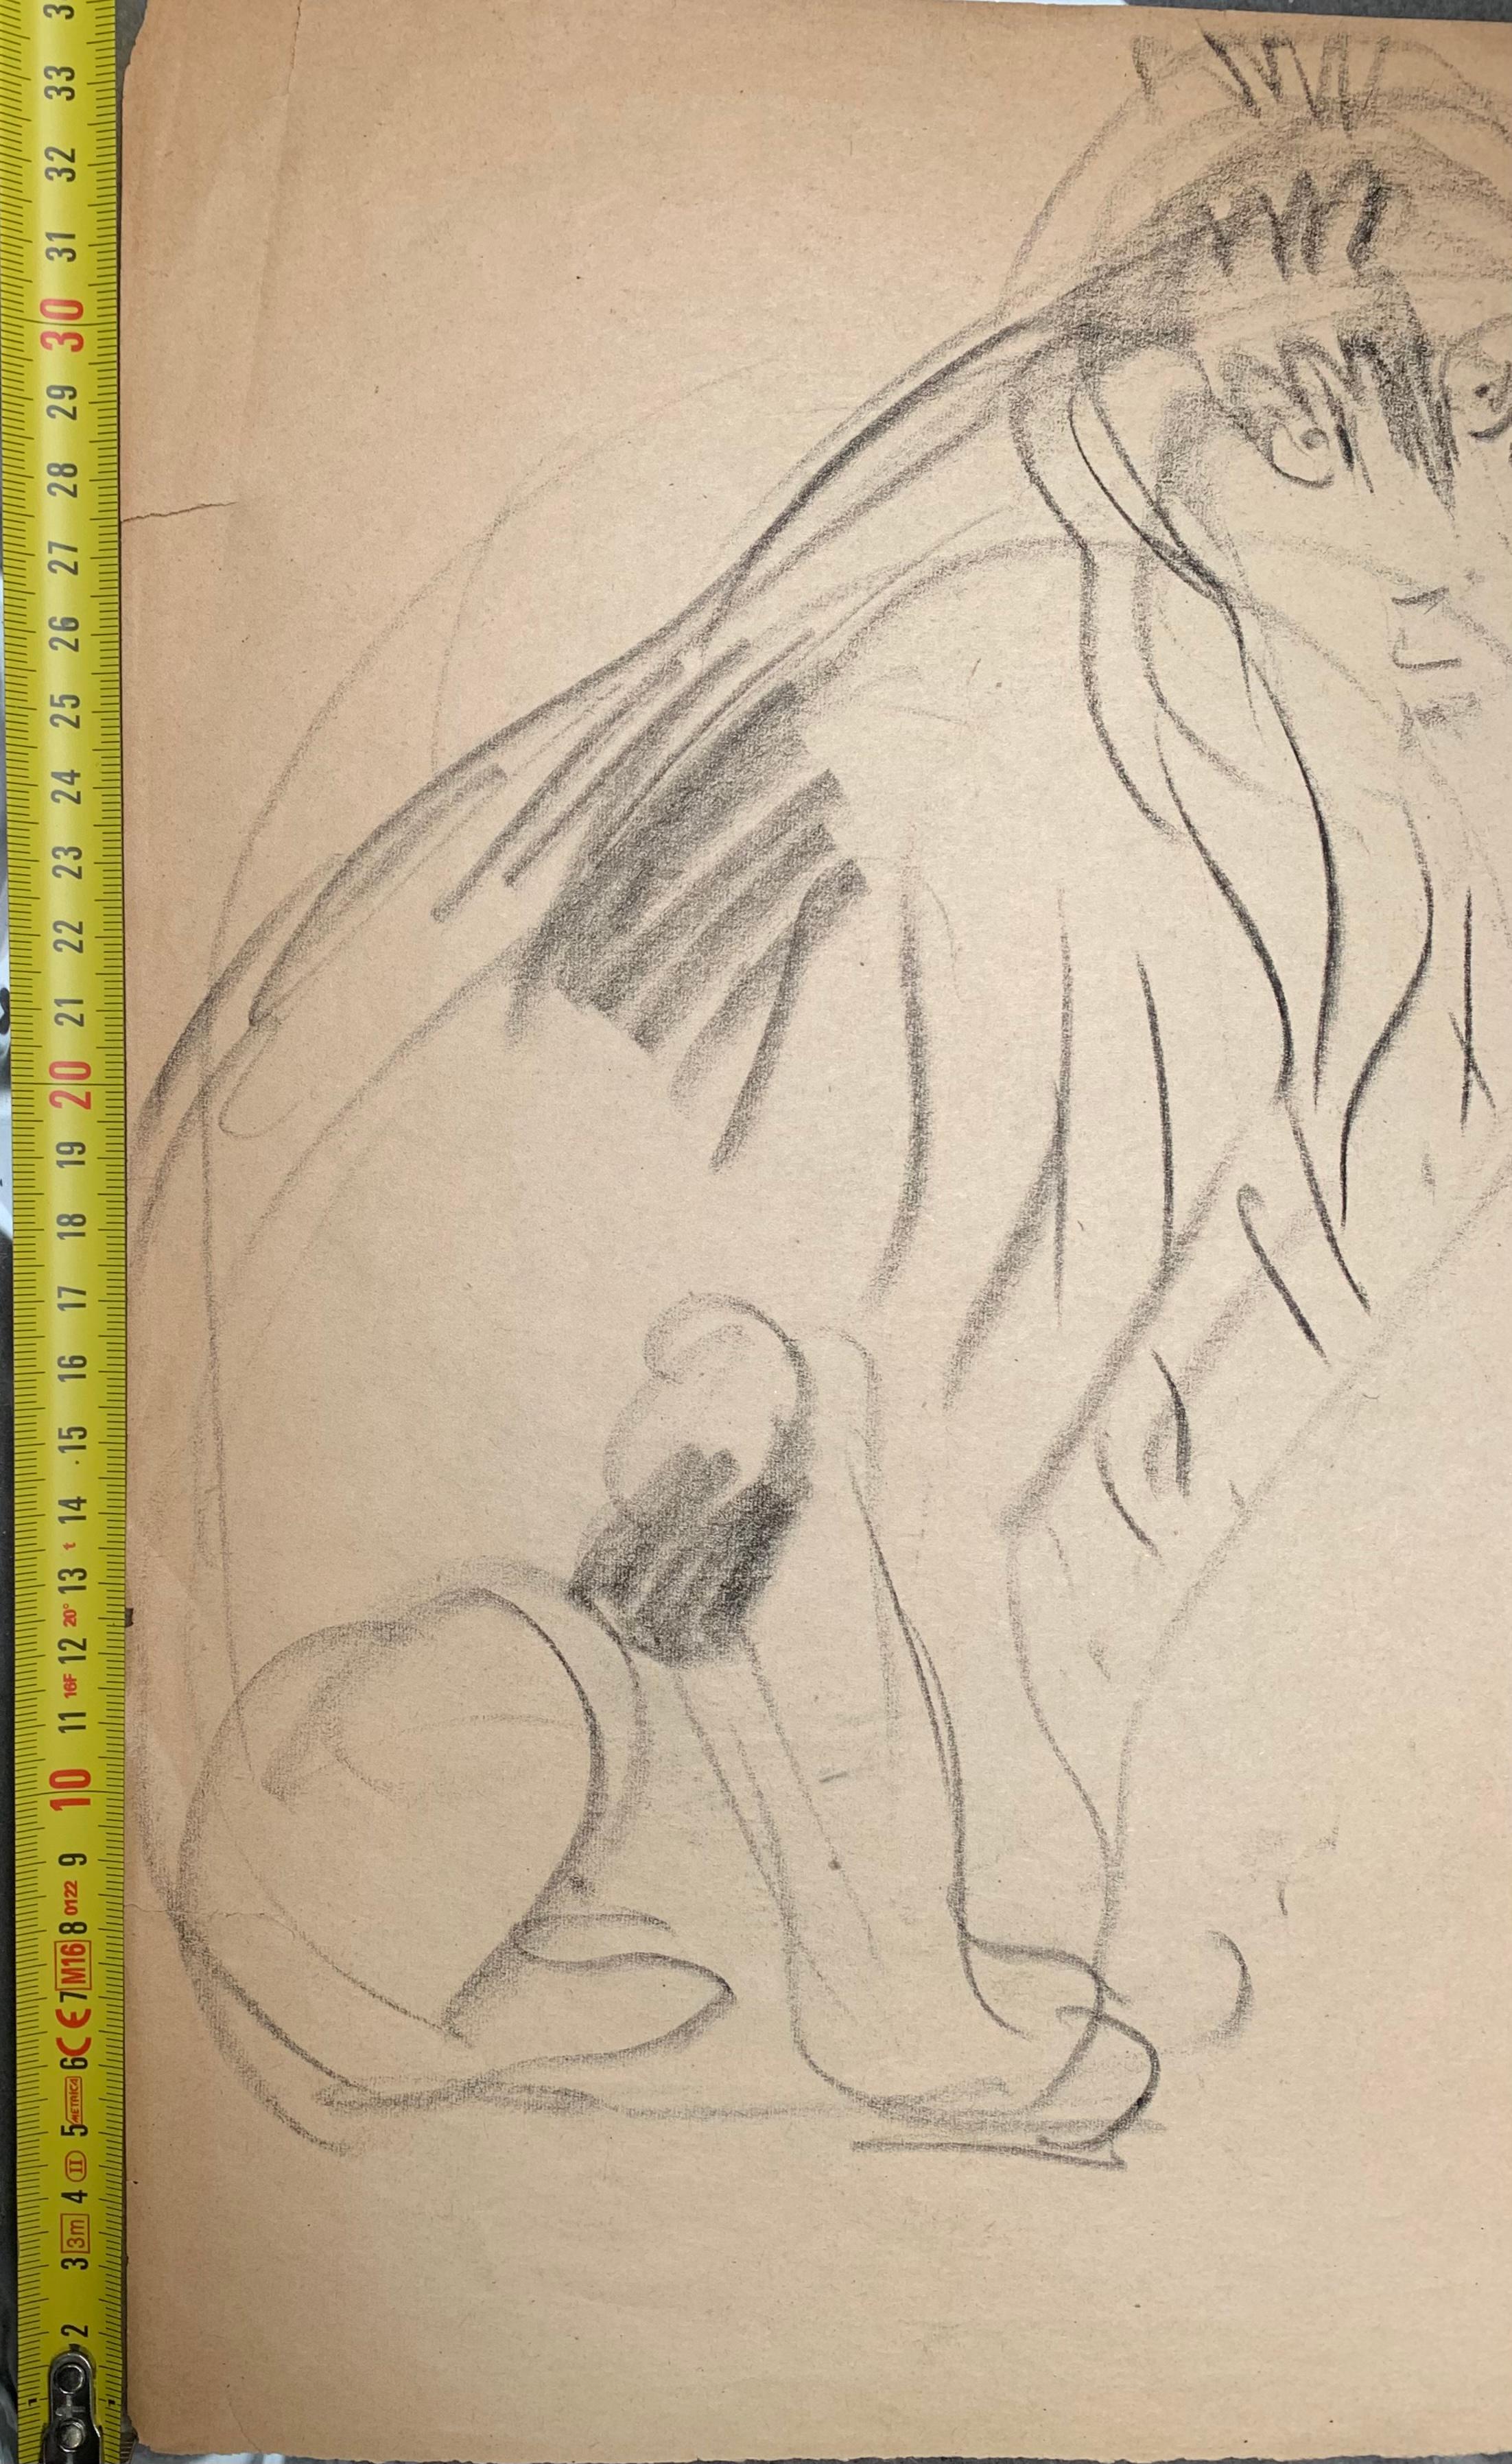 Authentic drawing from the early 20th century by the well-known French painter Gustave Guetant  (1873-1953).
Technique: pencil and charcoal on paper.
Bottom right stamp: ATELIER GUETANT.
Drawing on two sides of the paper: 
A pair of panthers is